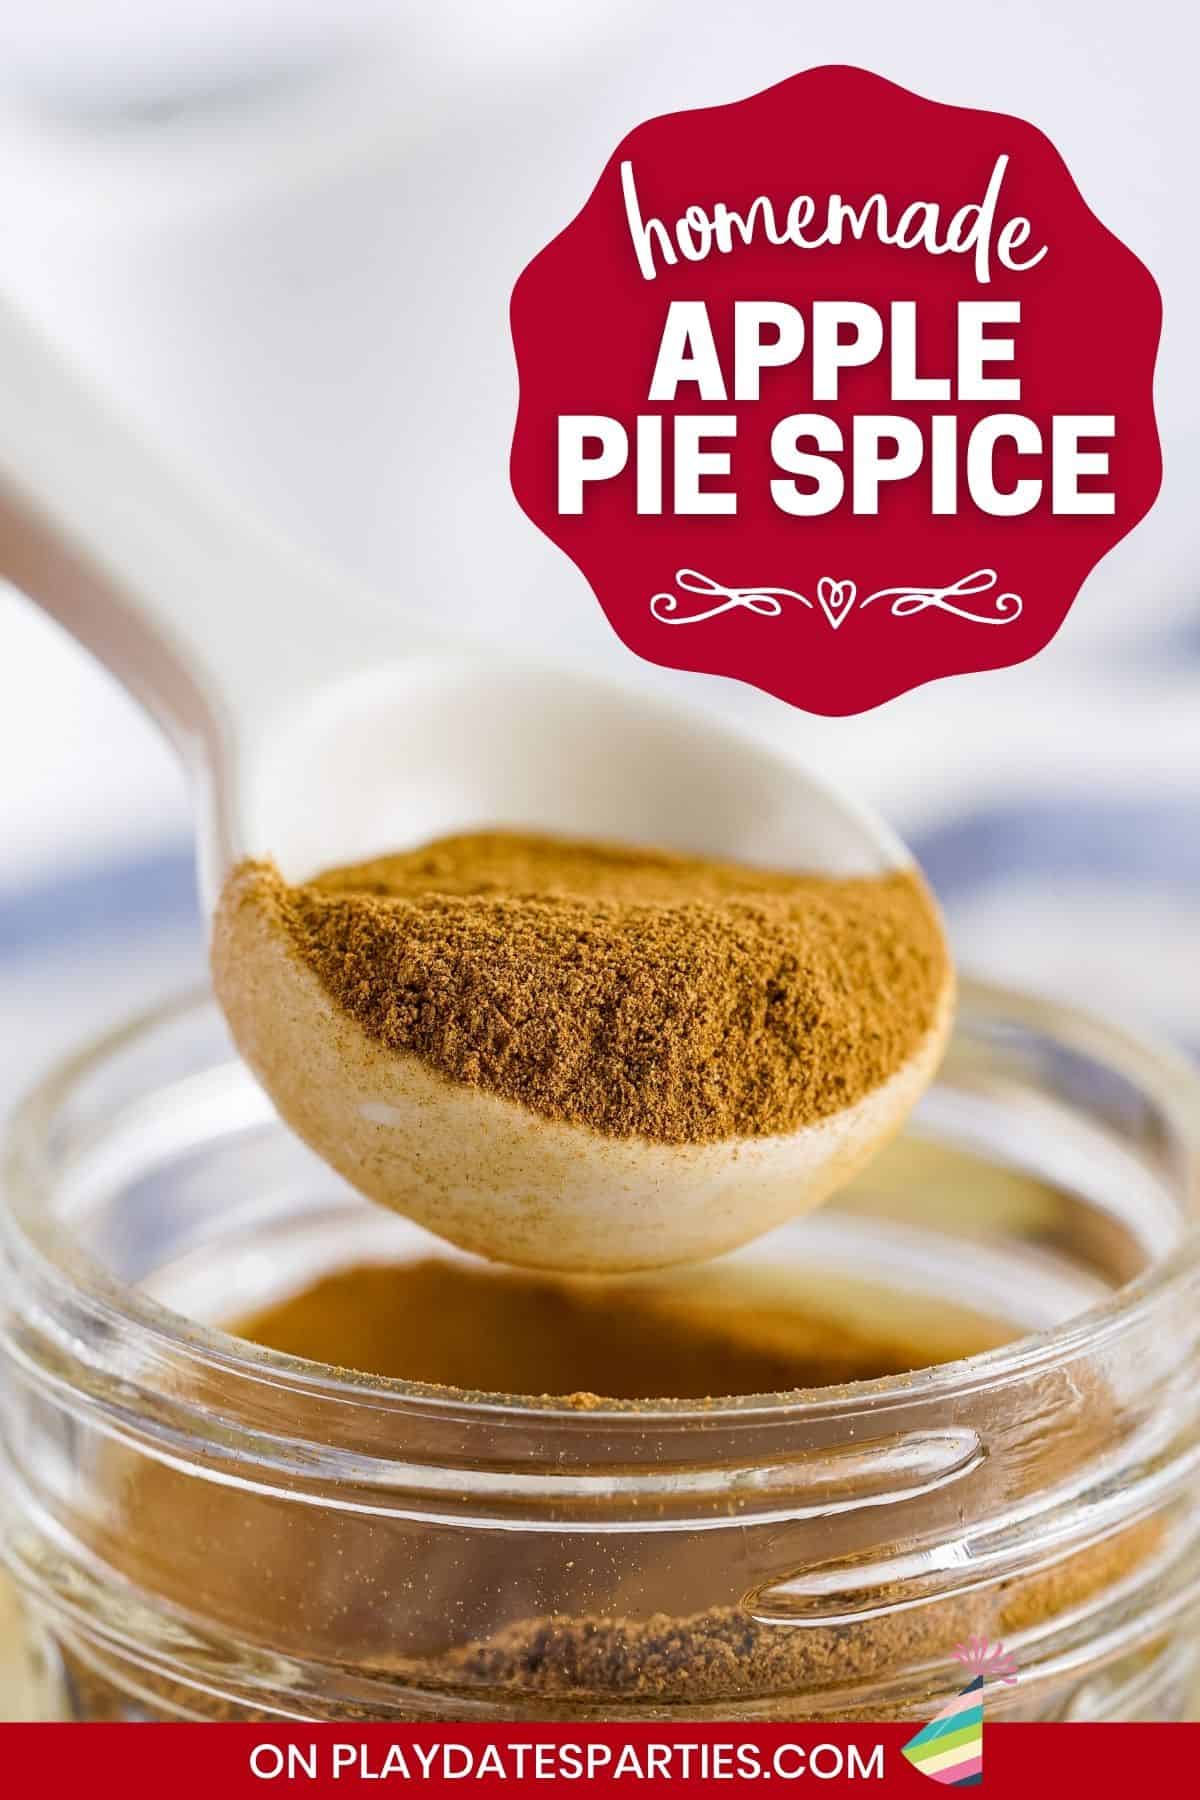 A teaspoon is used to measure out homemade apple pie spice blend.